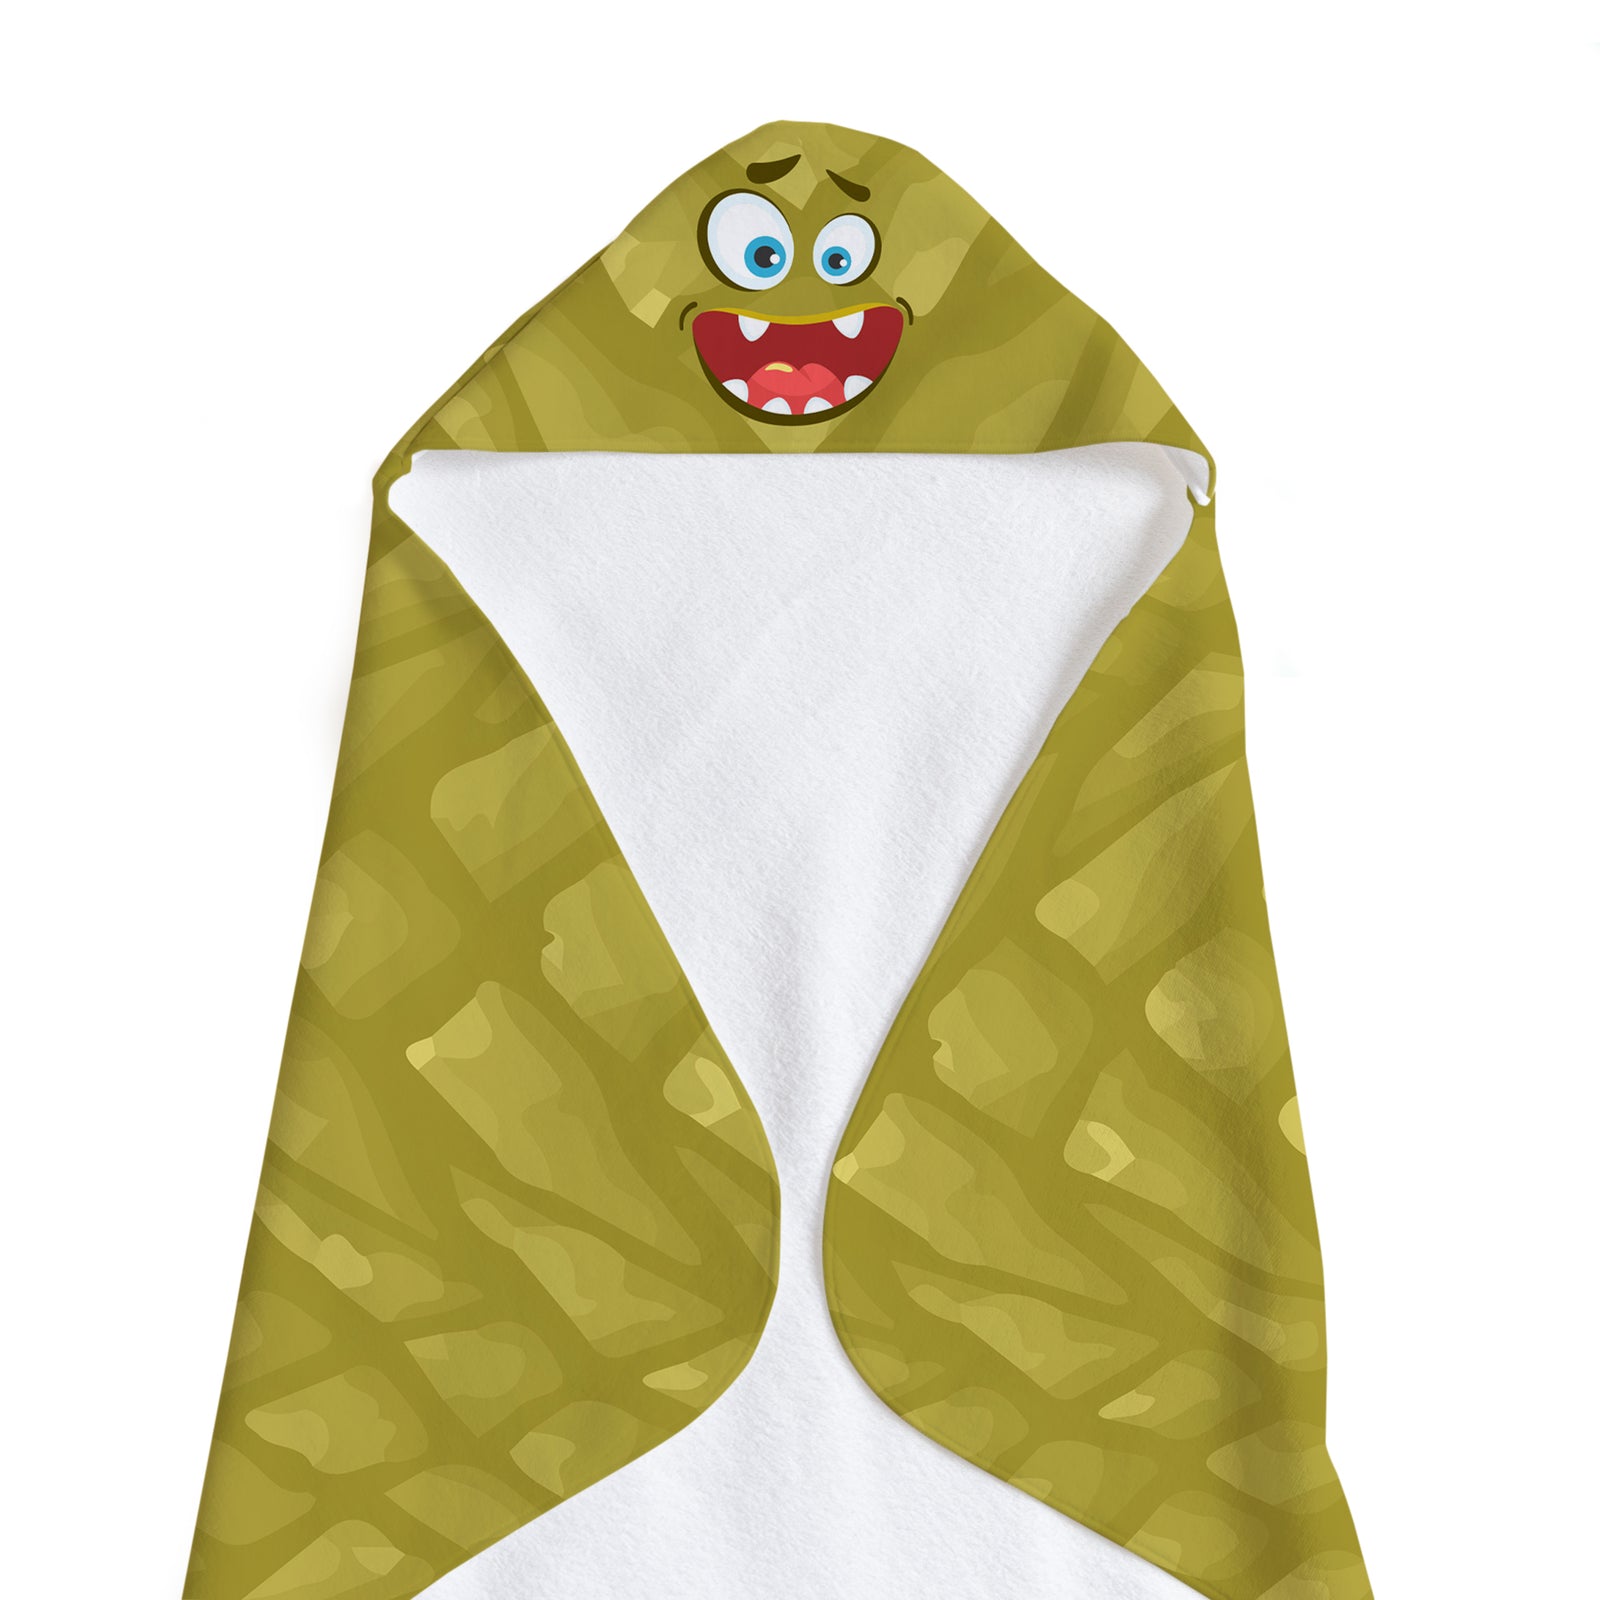 Buy this Yellow Monster Soft and Absorbent Hooded Baby Towel